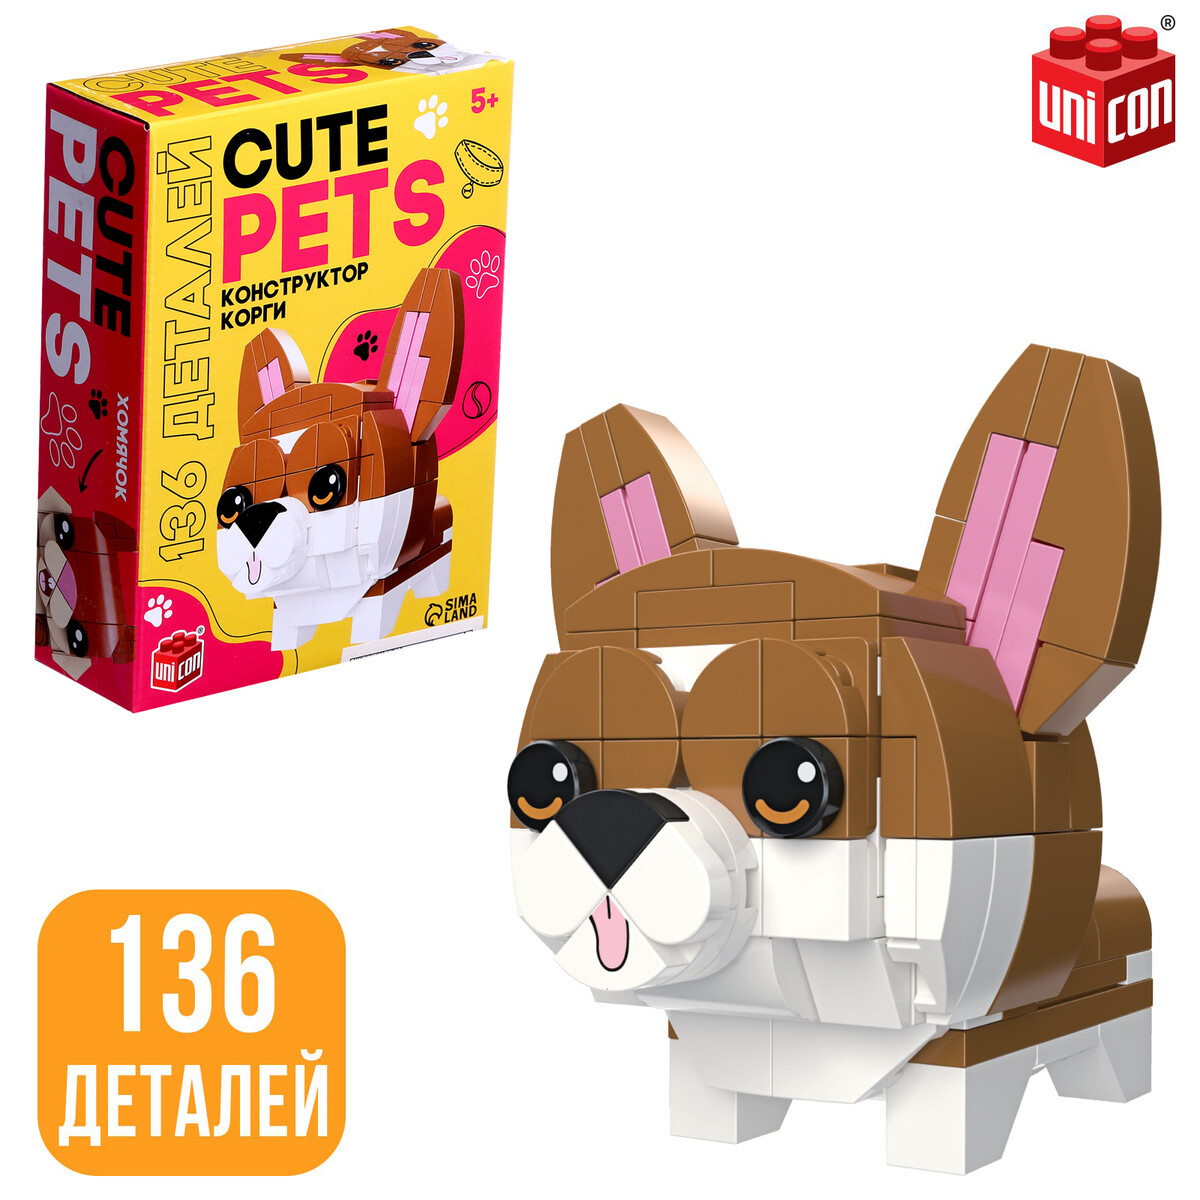 Конструктор cute pets, корги, 136 деталей push and go cars cute space design push and go toy cars learning education toys for interaction early education festive gift